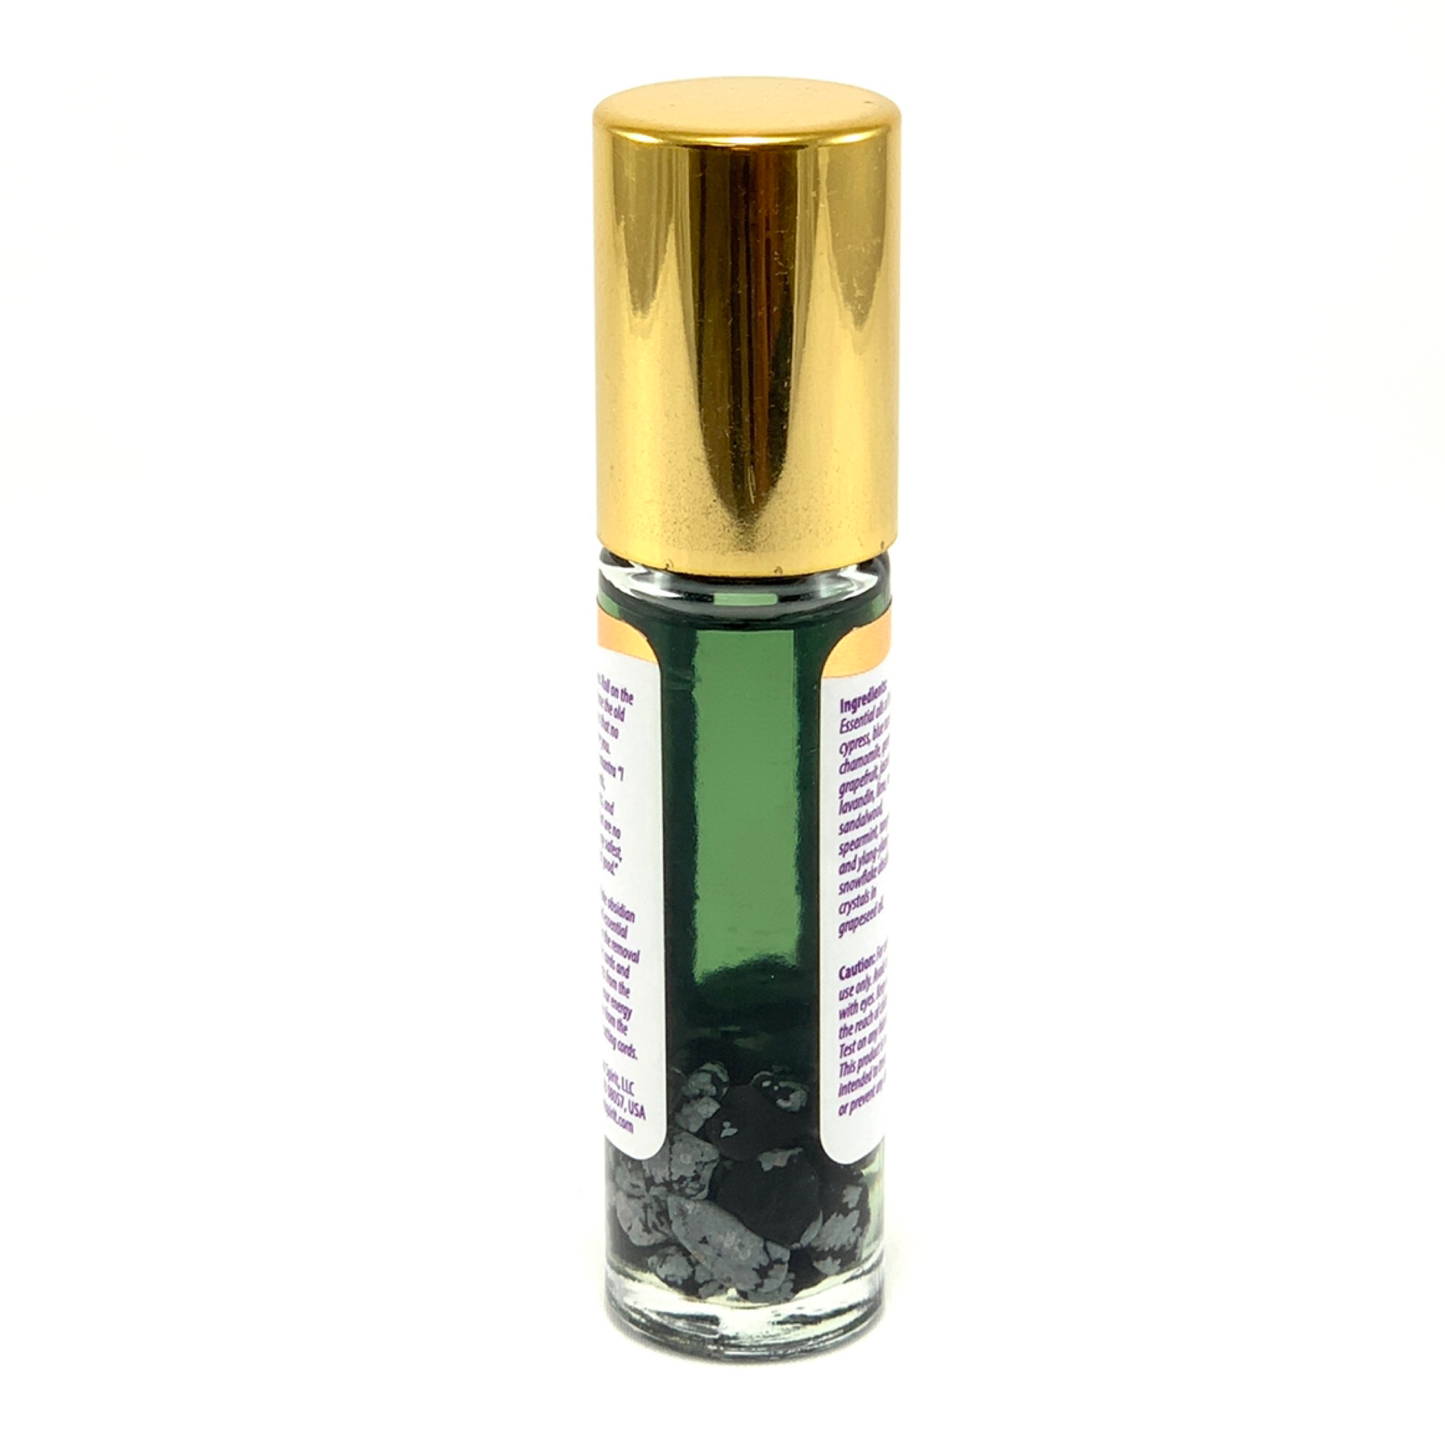 Cord Cutting Crystal-Infused Oil